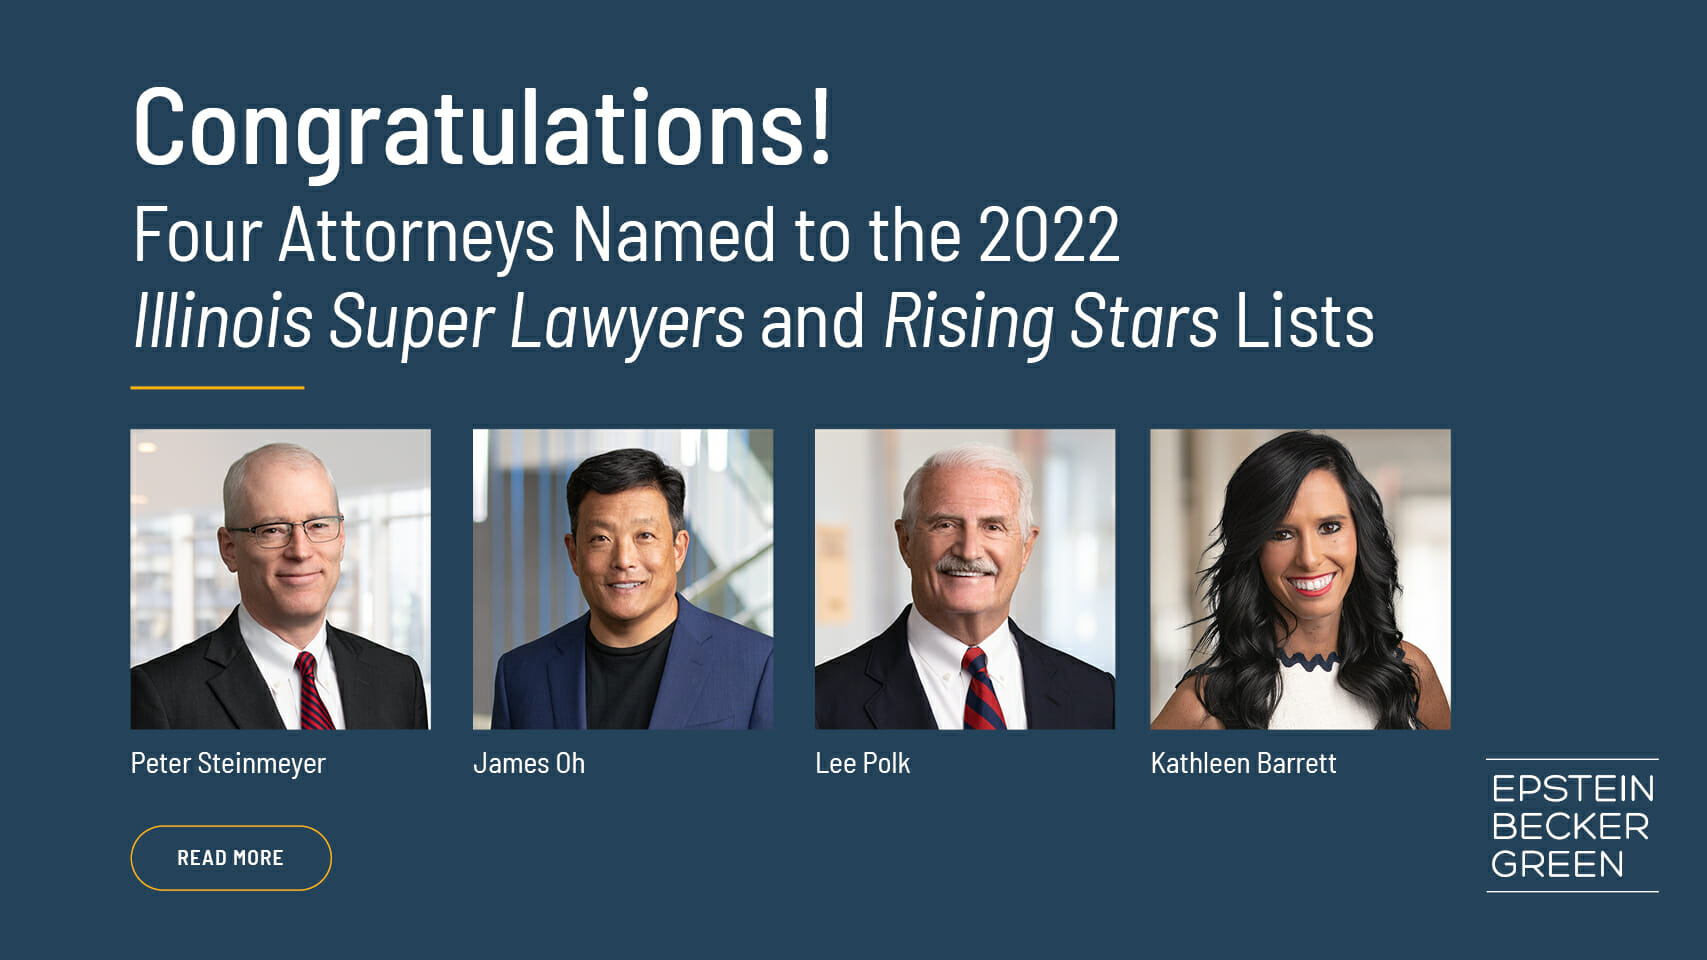 Four Attorneys Named to the 2022 Illinois Super Lawyers and Rising